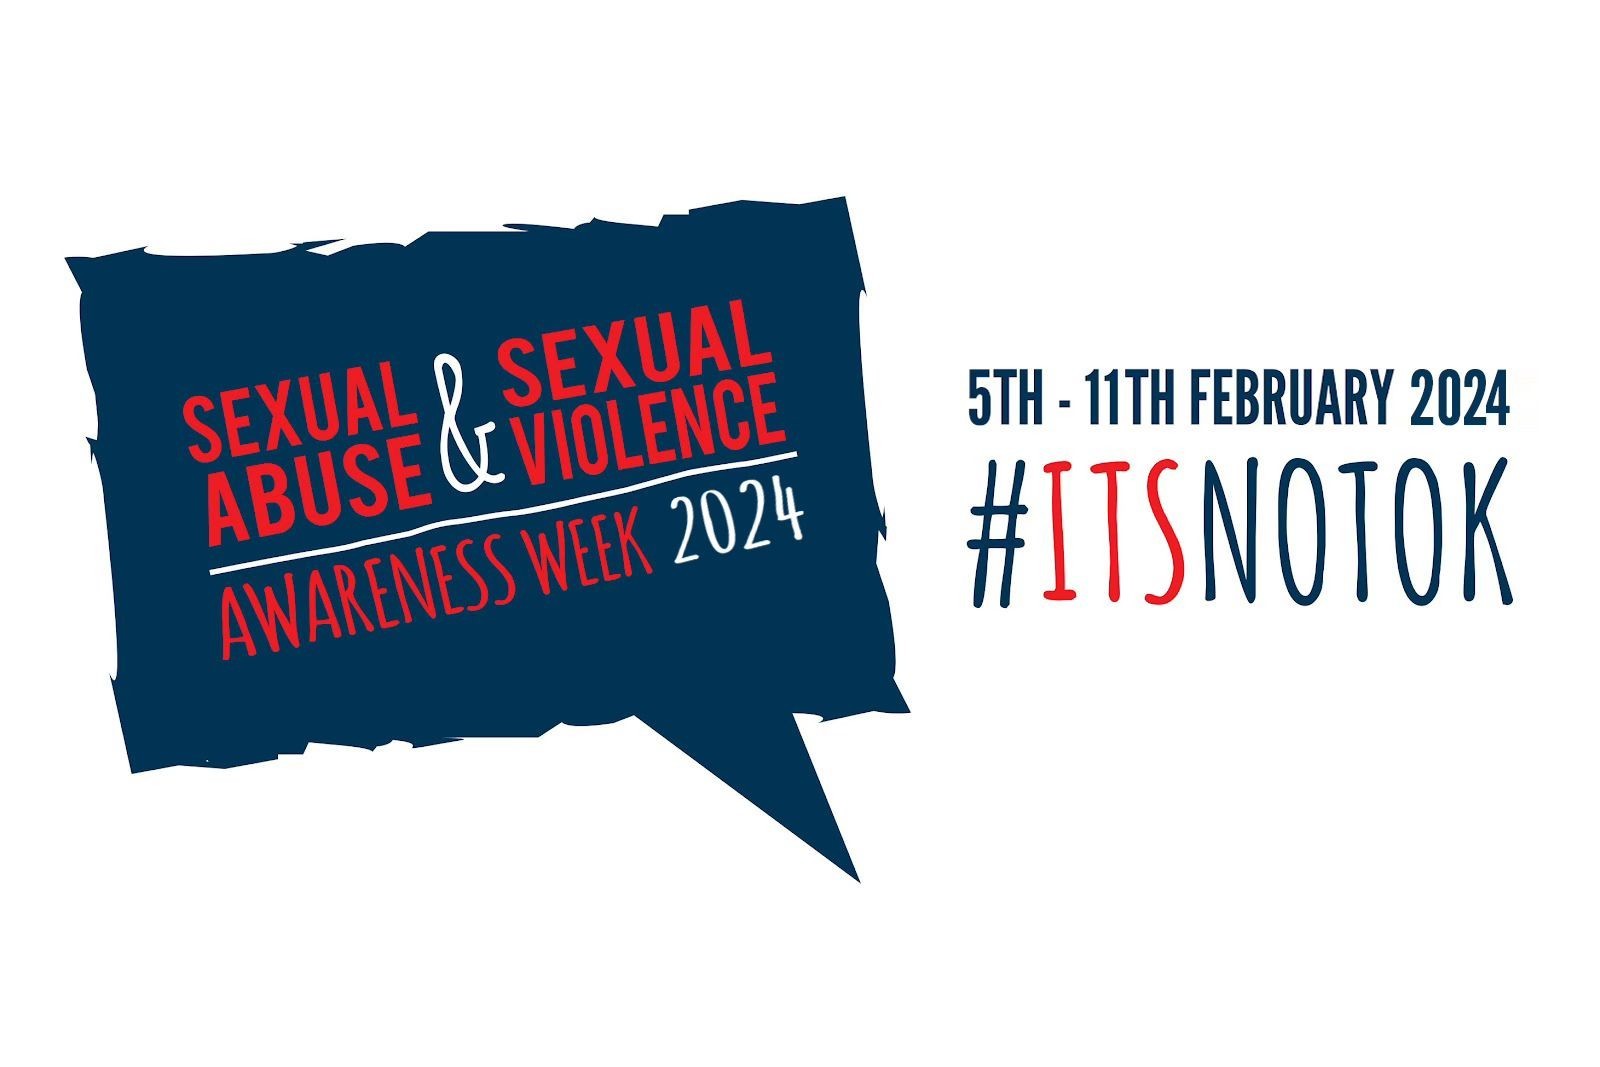 Free Access to our Bitesize Courses for Sexual Violence and Harassment Week.